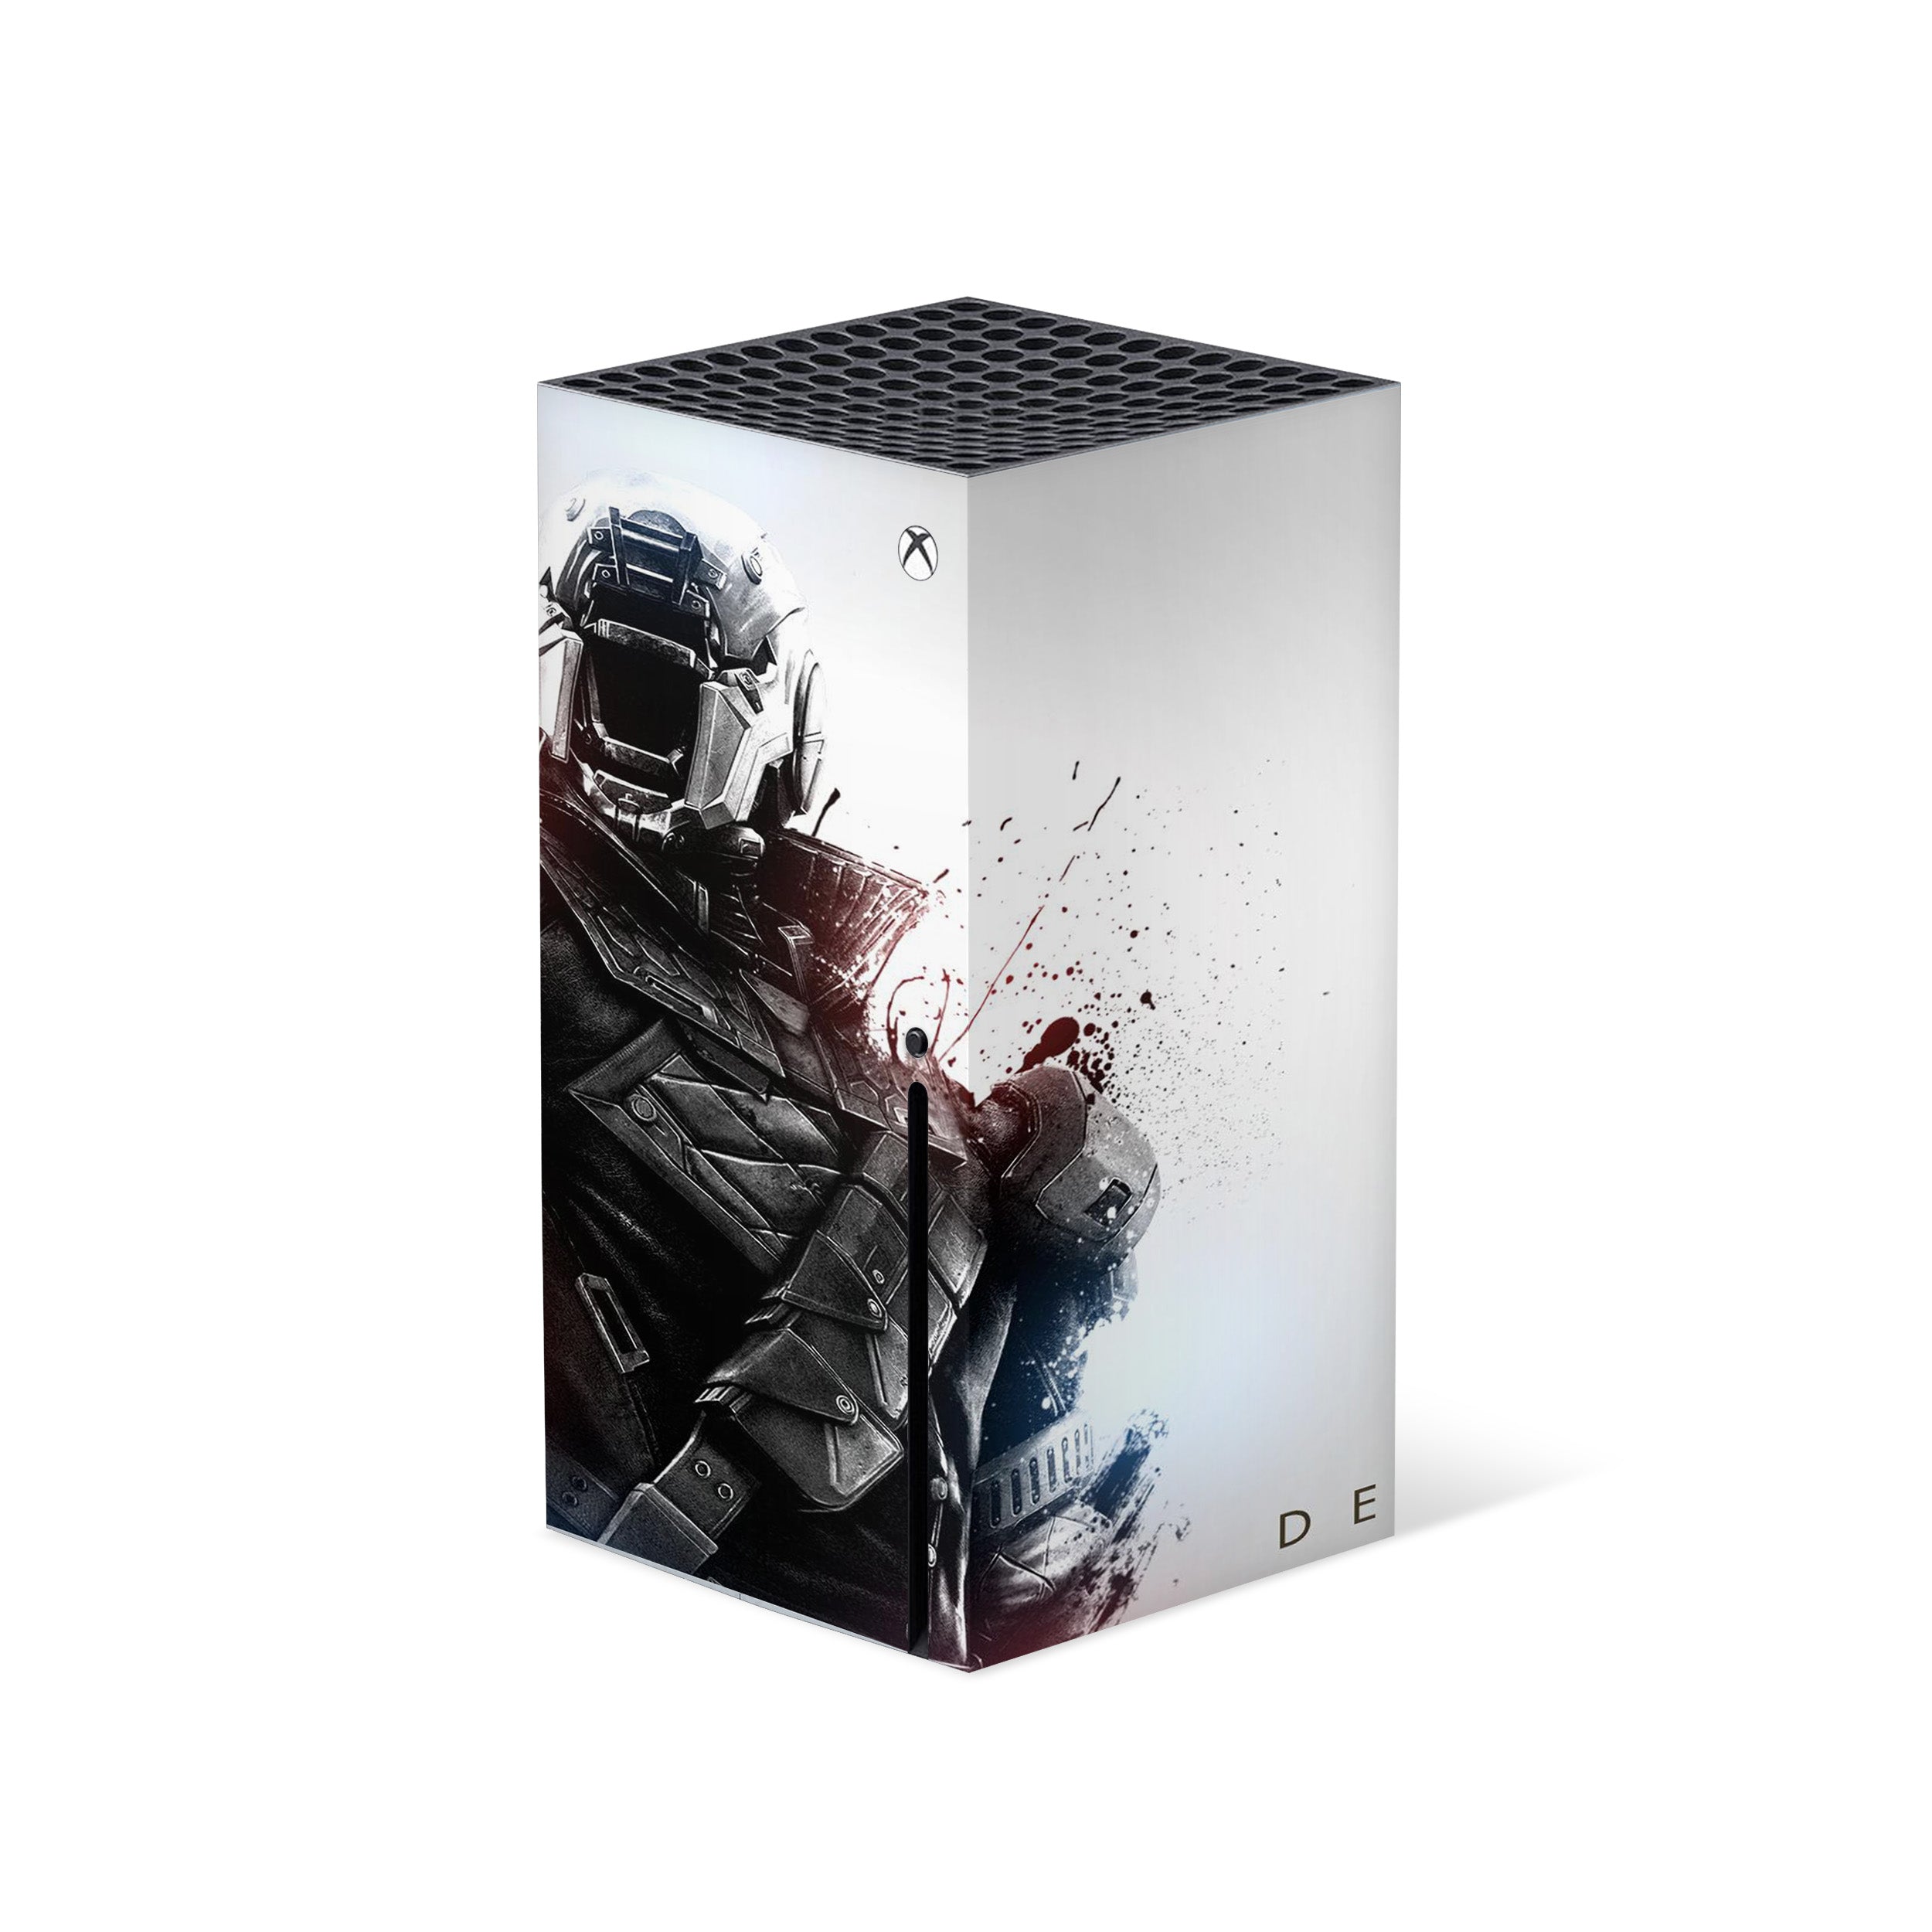 A video game skin featuring a Destiny design for the Xbox Series X.